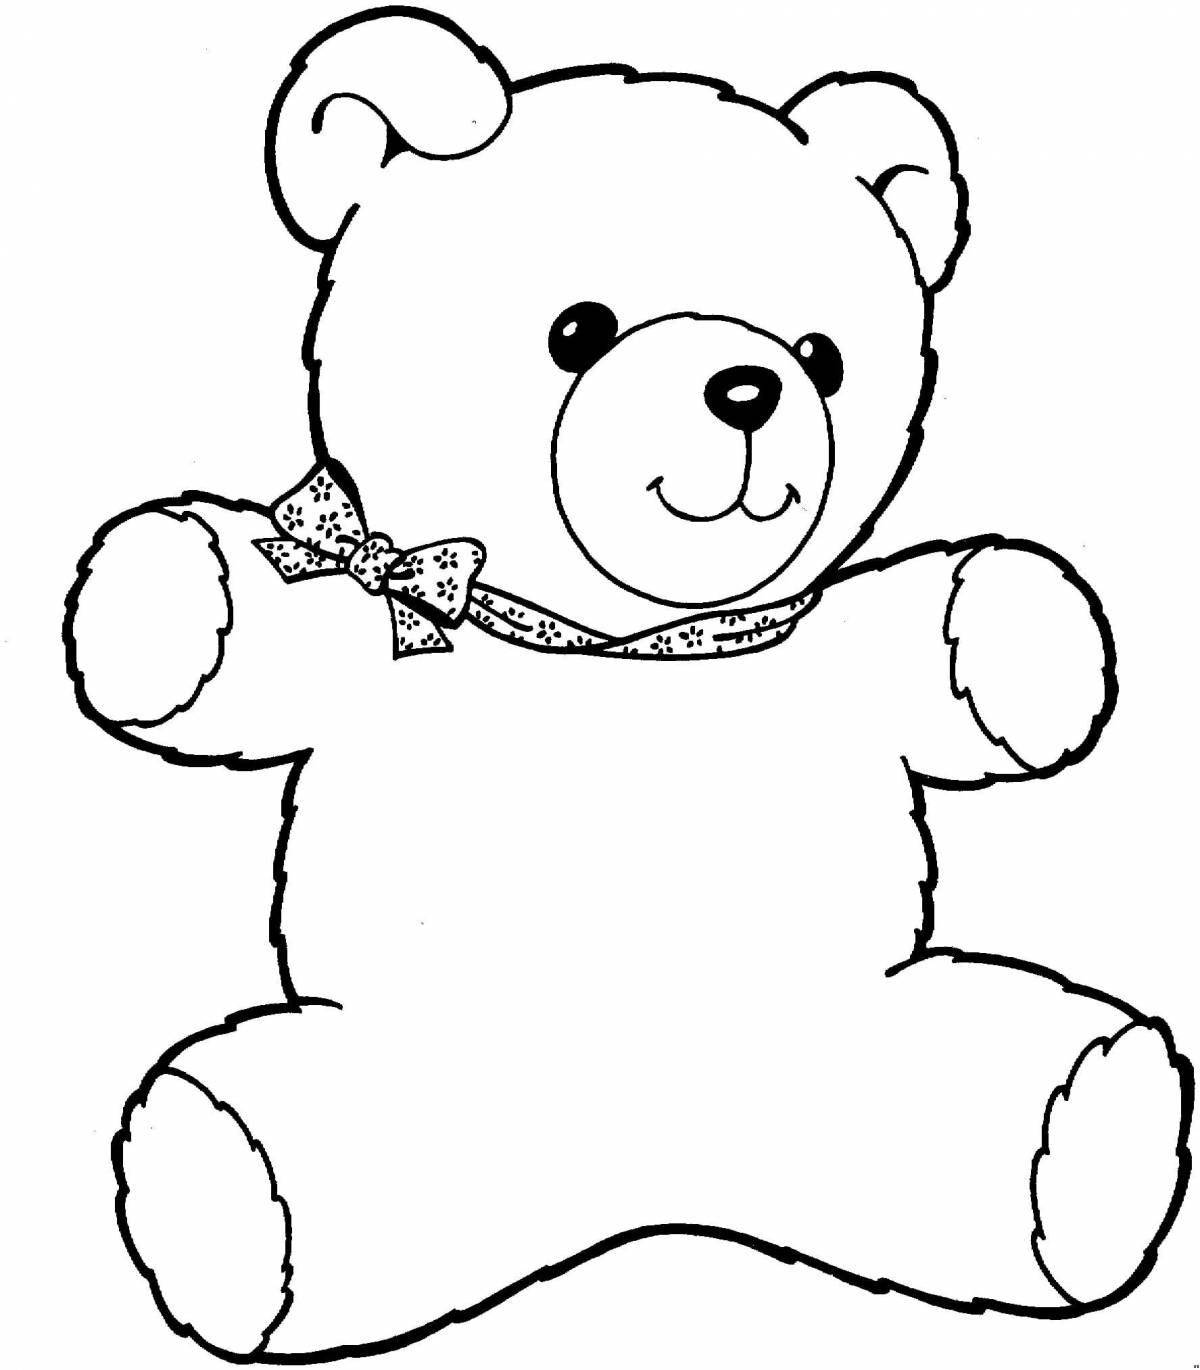 Fancy bear toy coloring page